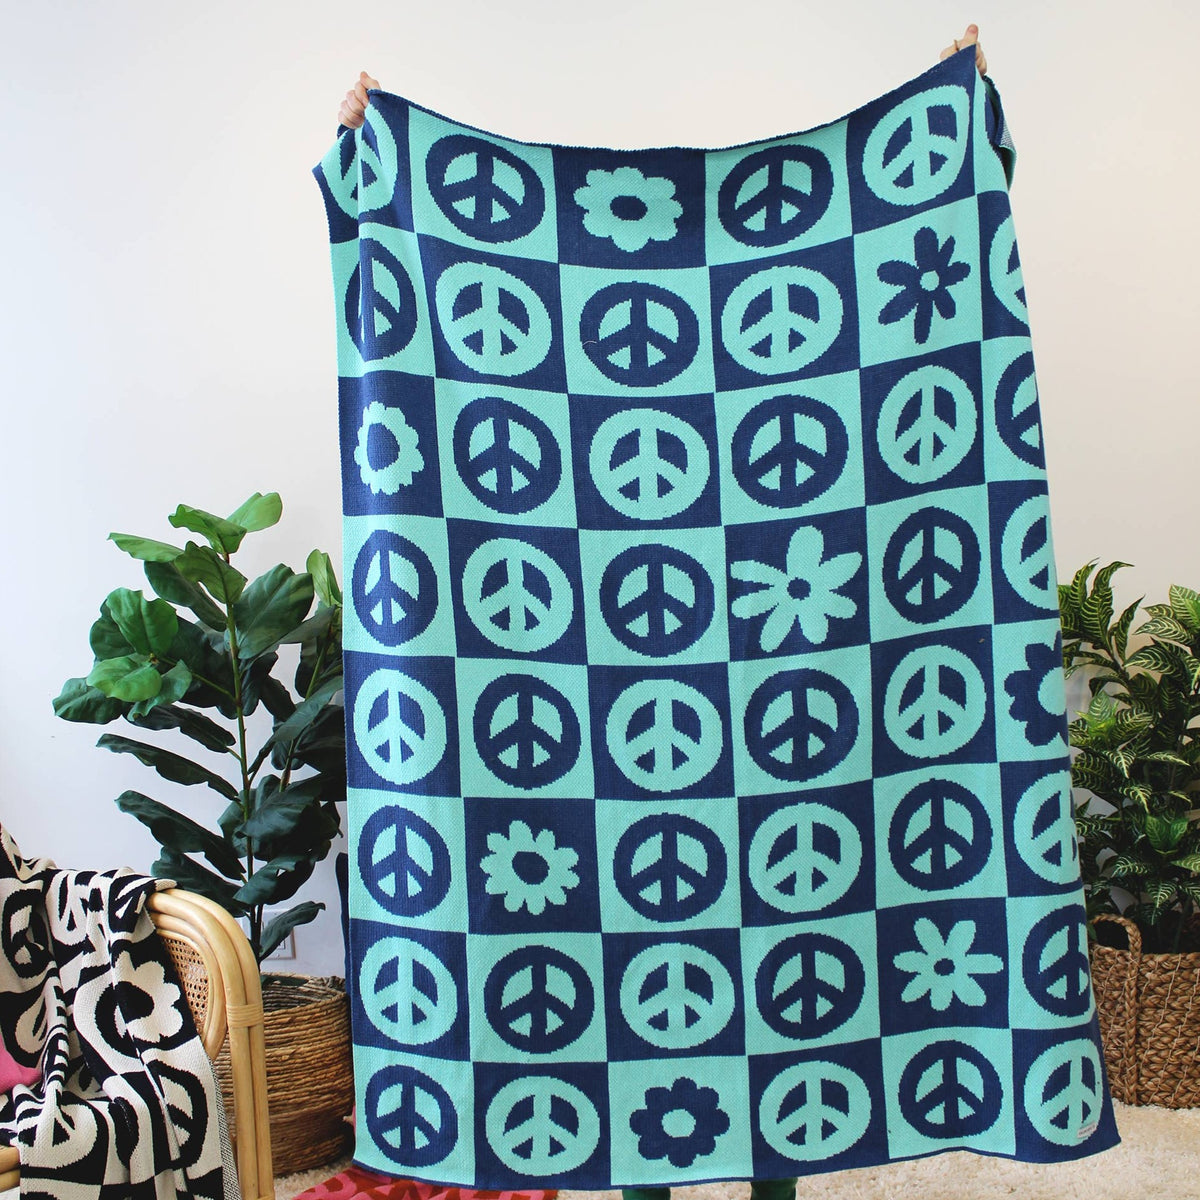 Peace Please Checkered Knit Throw Blanket with Flowers